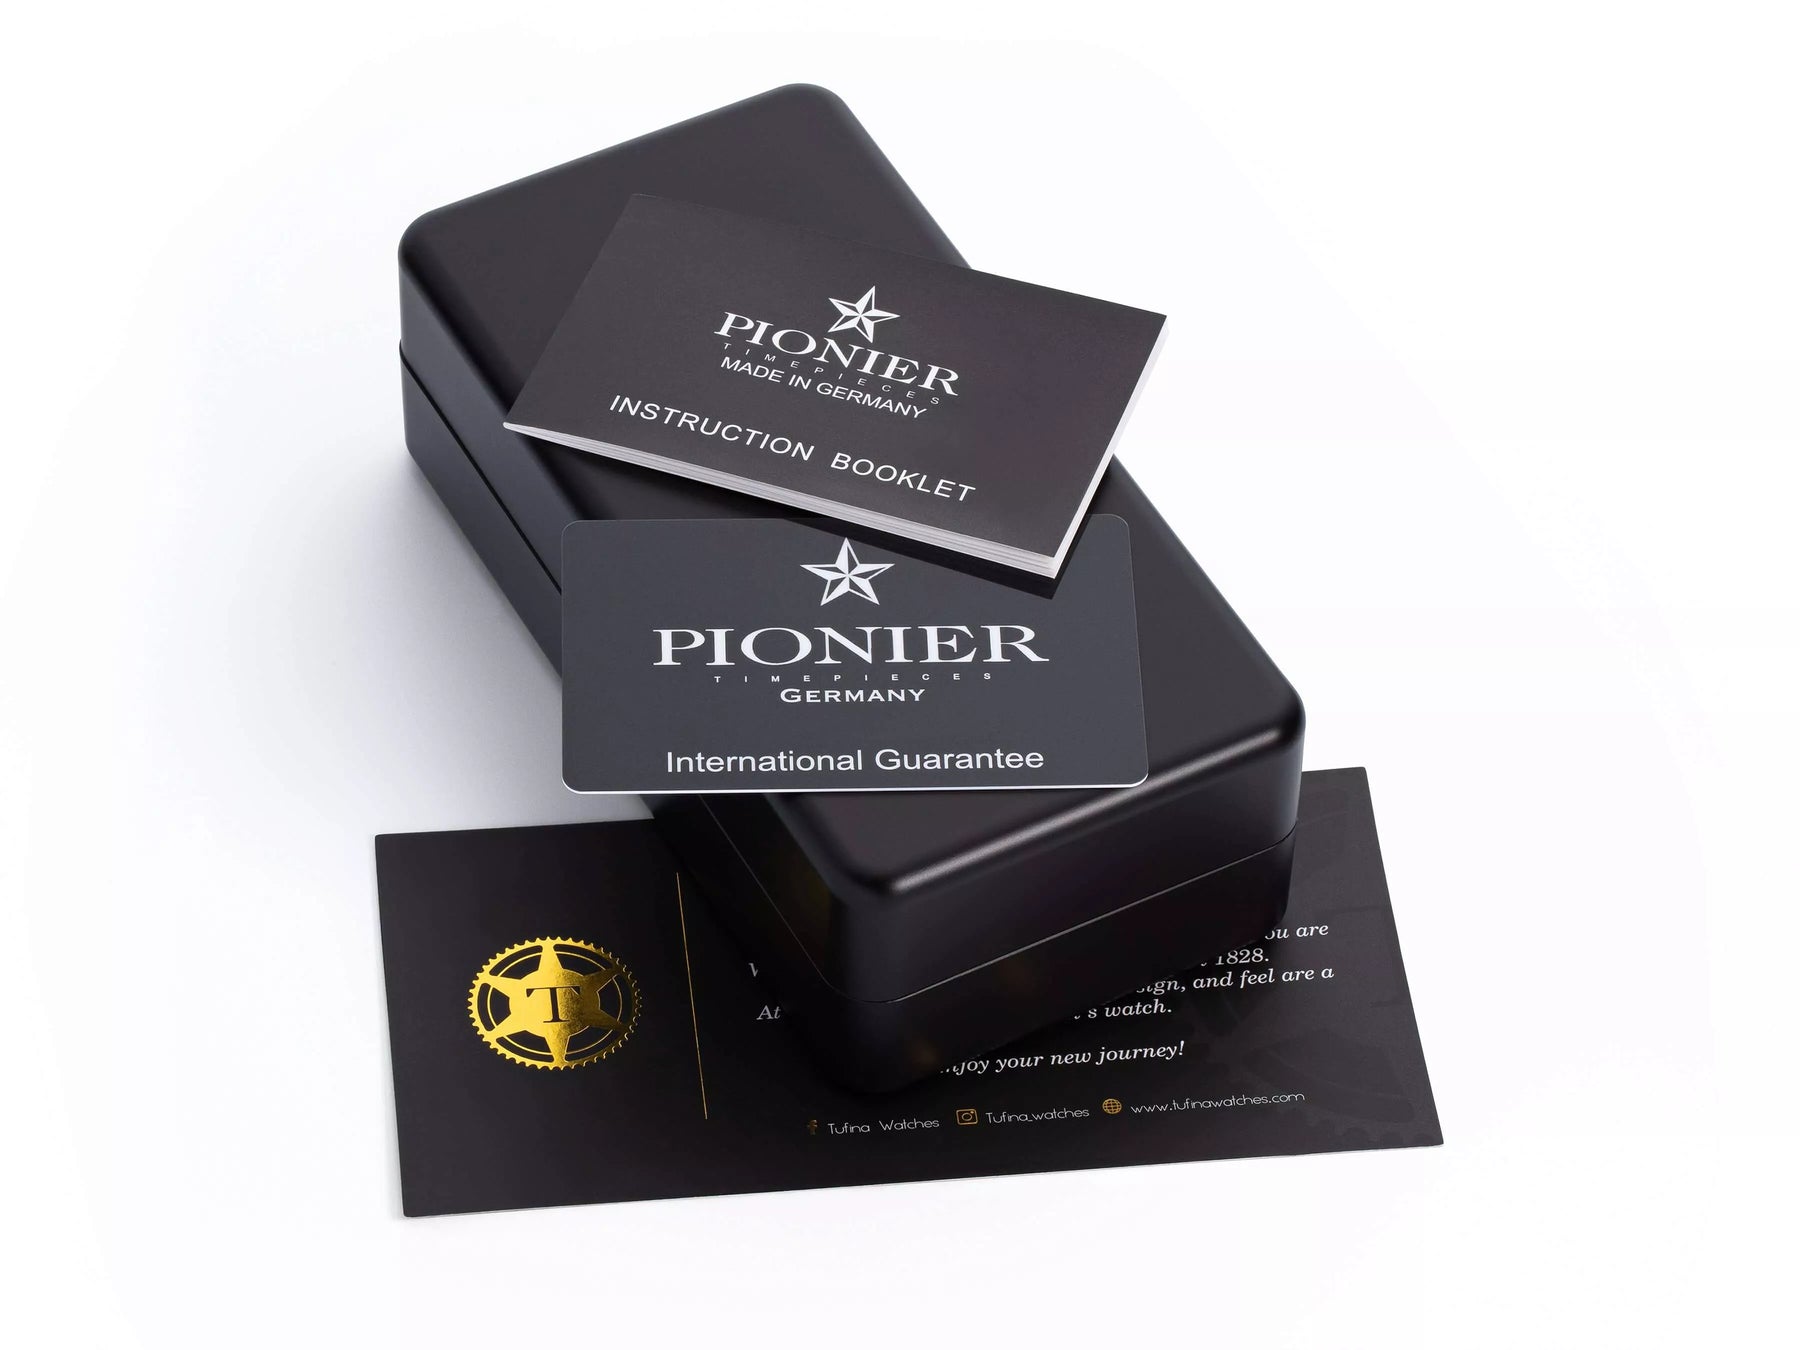 Pionier original box with instruction booklet, international warranty, and thank you card.